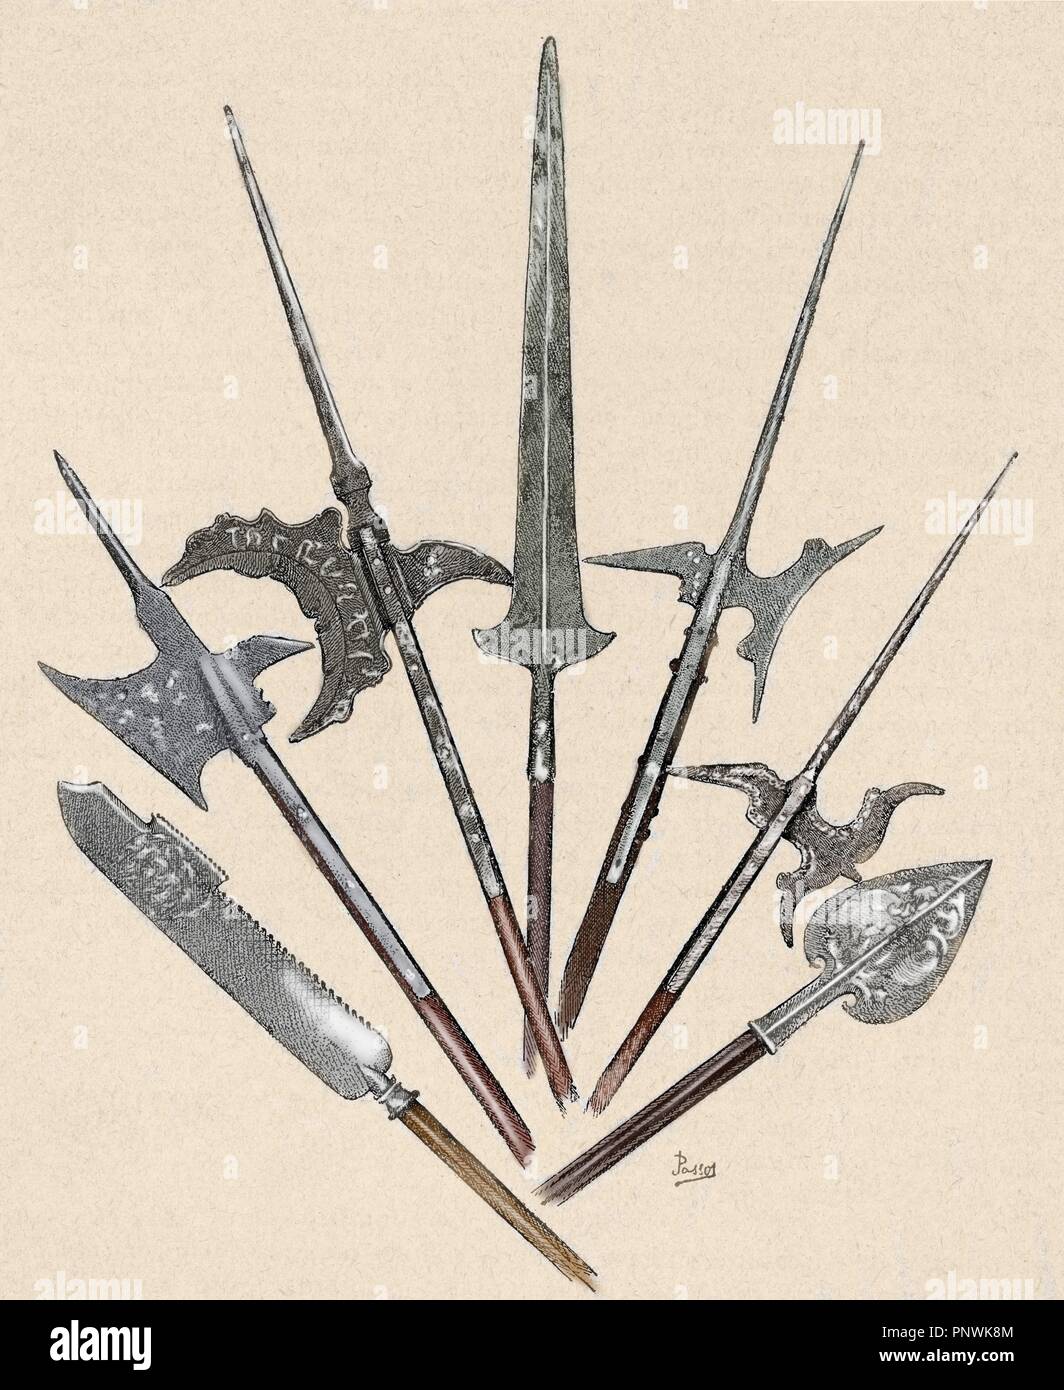 Weapons. Swiss Halberd from 18th century, Swiss halberd from 15th century, German halberd from 16h century, French halberd from 16th century, Venetian halberds from 16th century and spearhead of the 16th century. Colored engraving. Stock Photo